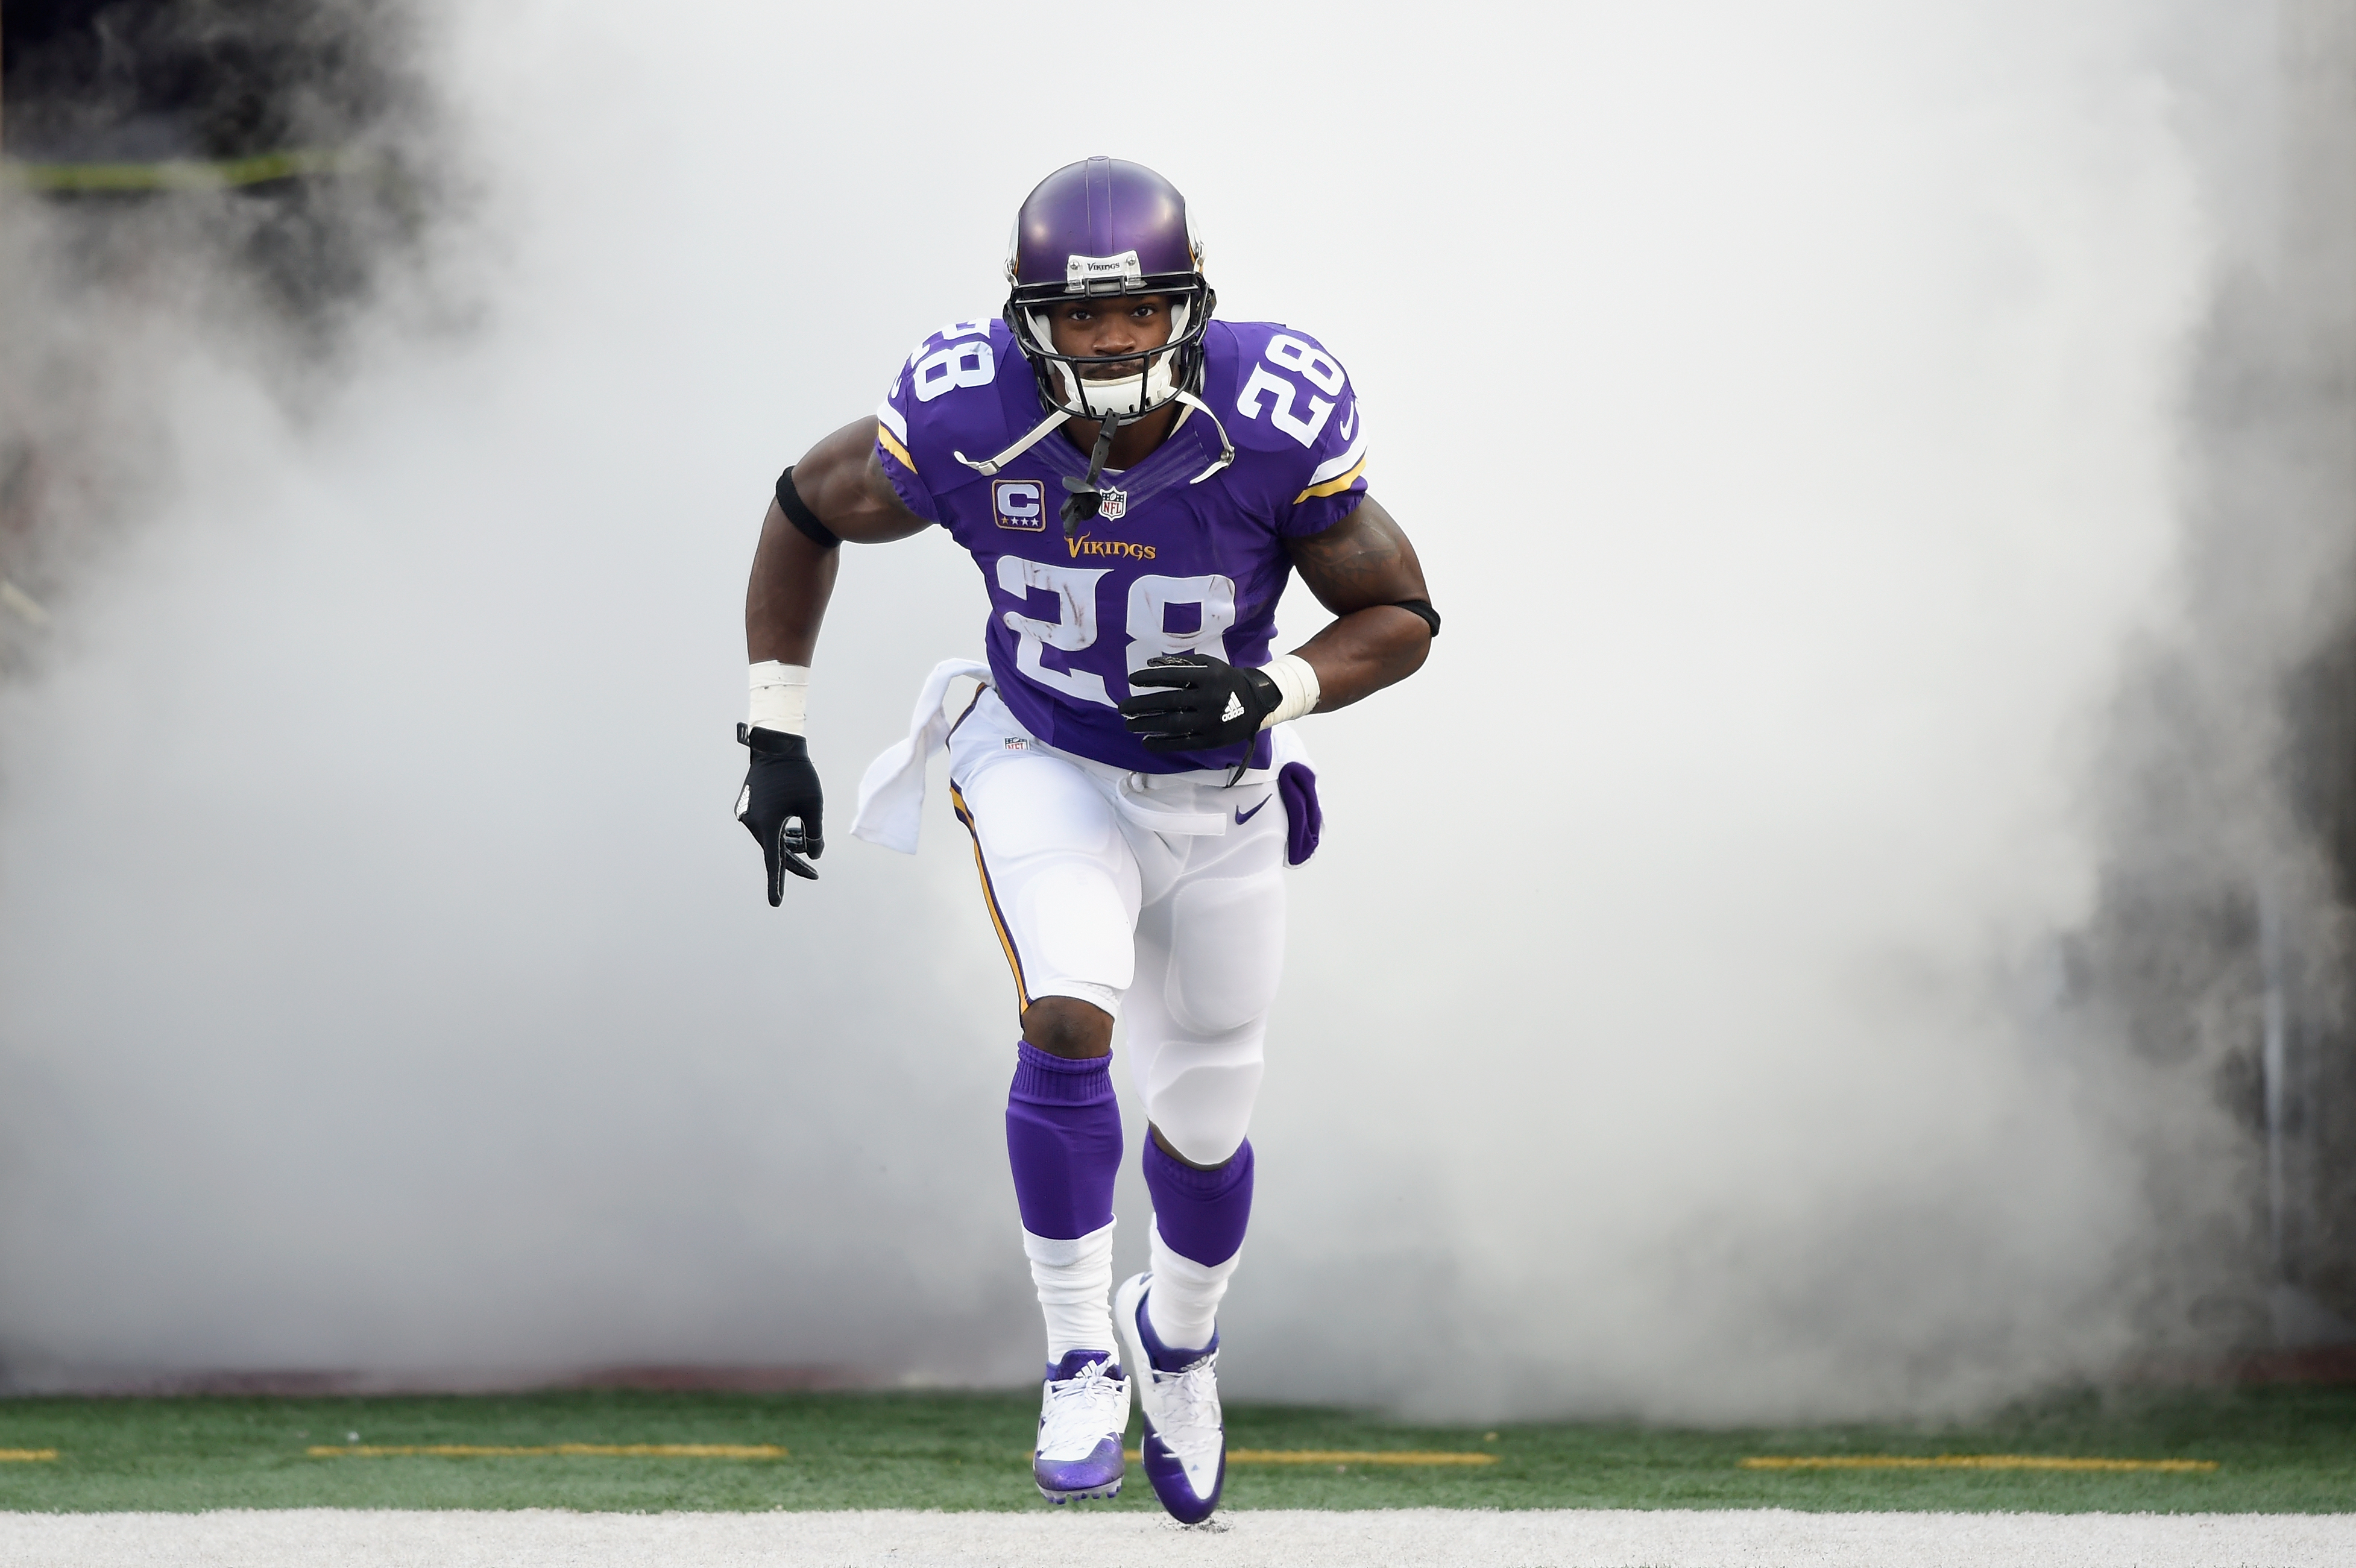 NFL on ESPN on X: ALL. DAY. Adrian Peterson gets the 1st TD of